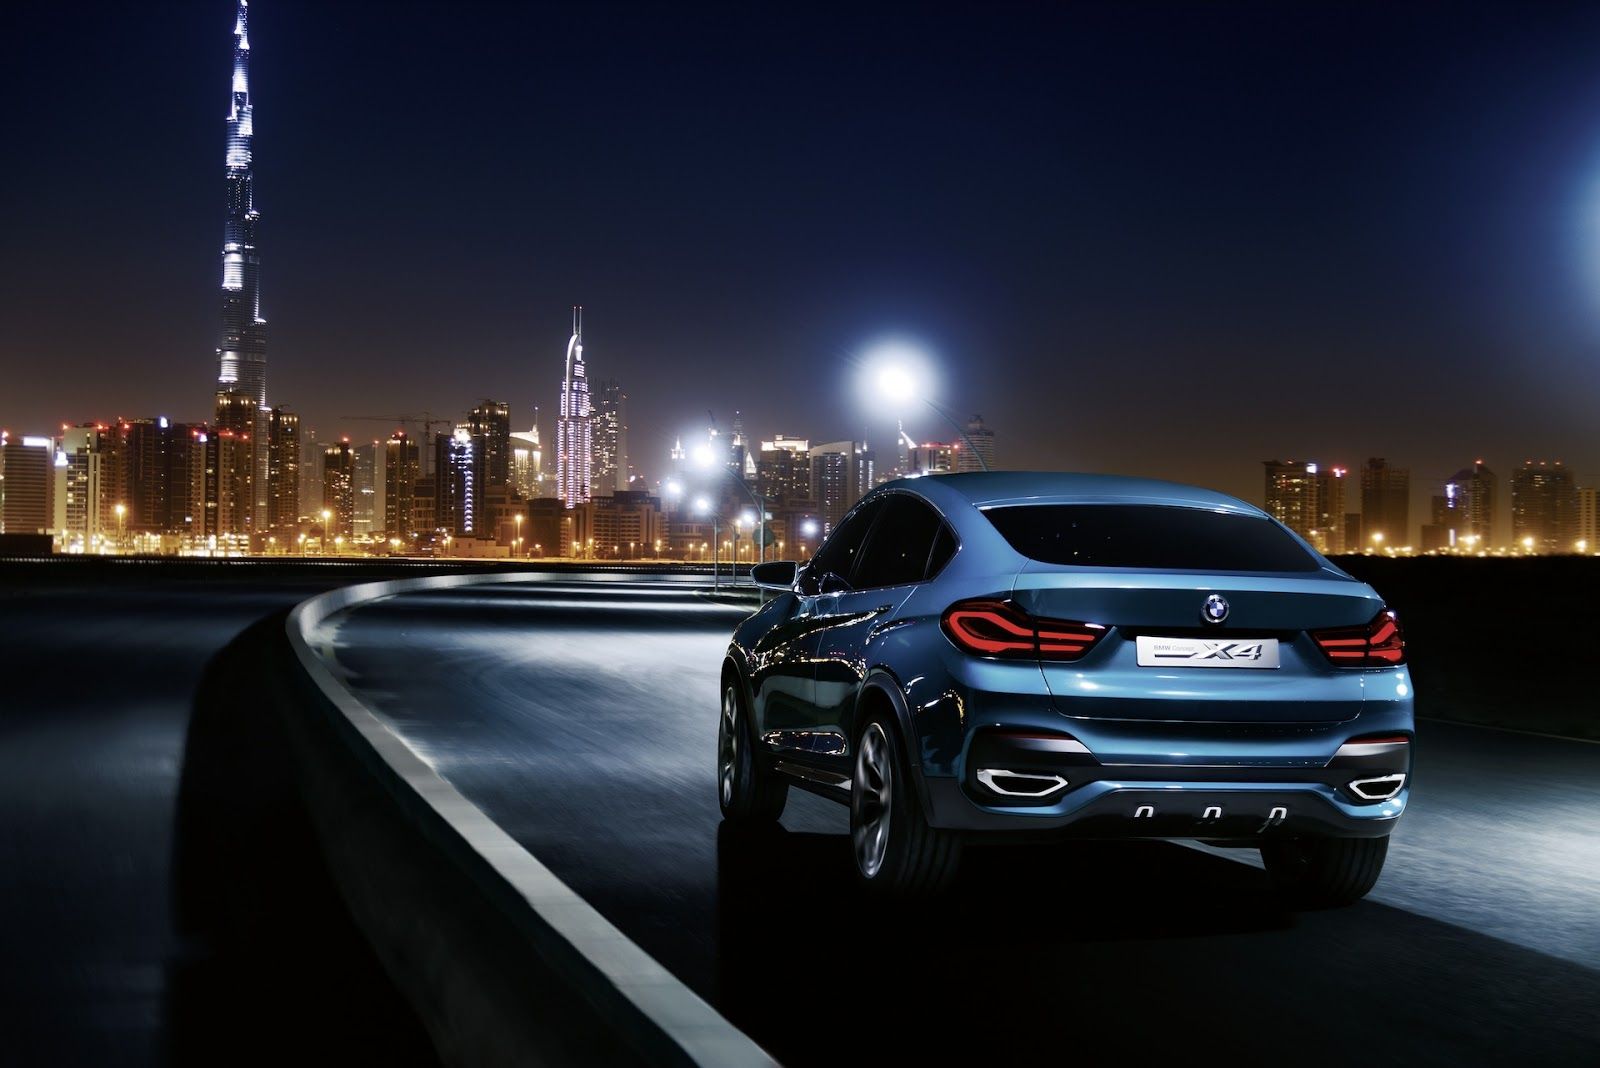 BMW Concept X4 Press Release and Wallpaper